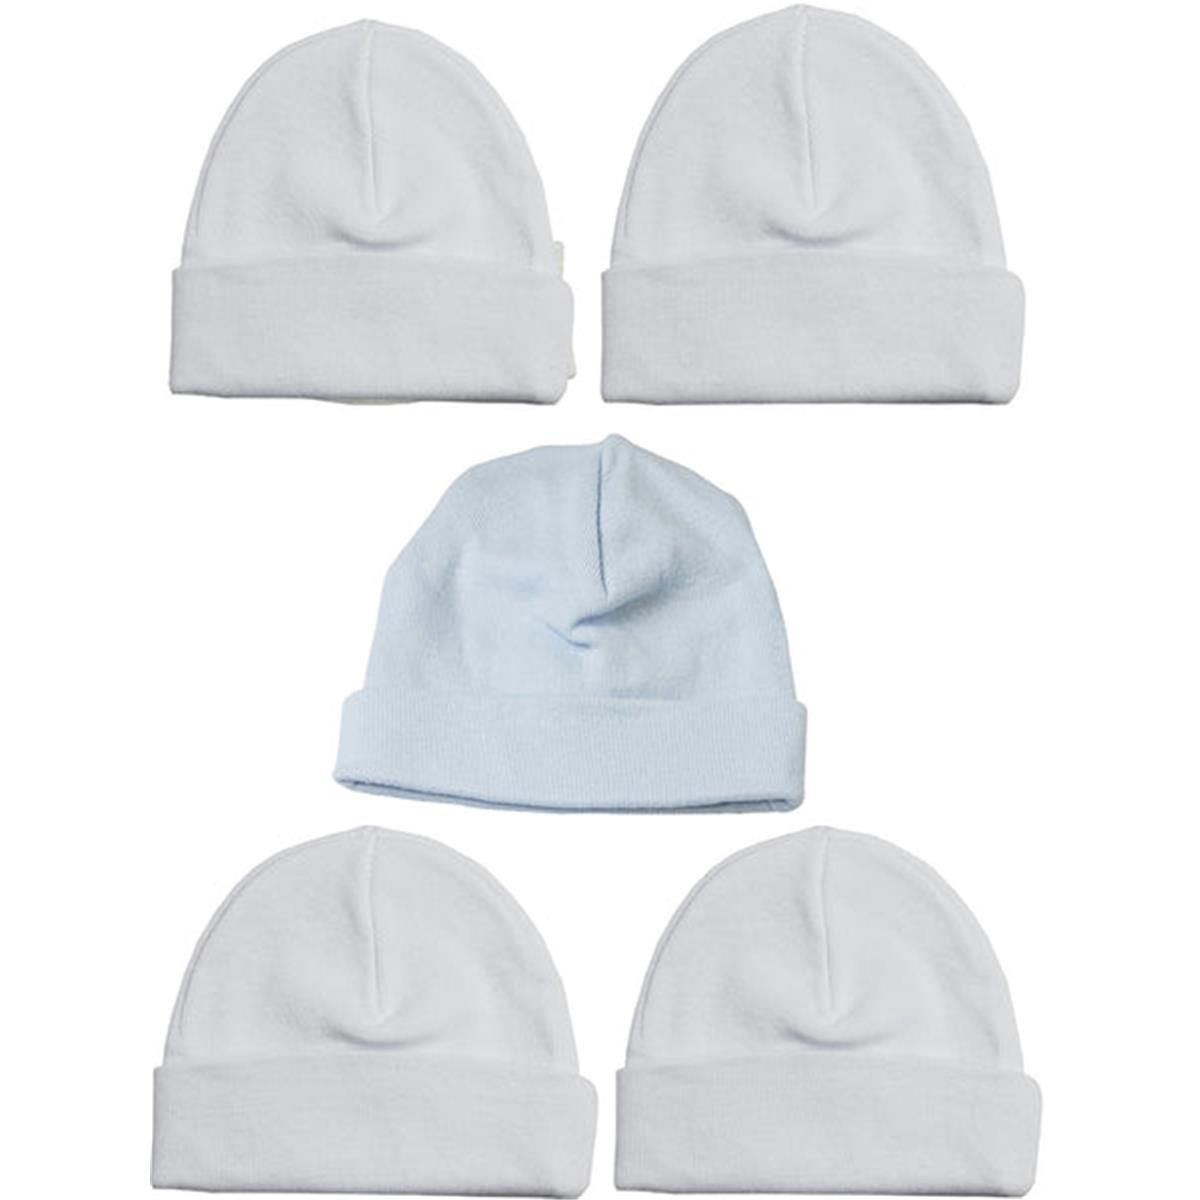 Picture of Bambini LS-0492 Boys Baby Caps&#44; Blue & White - One Size - 5 per Pack